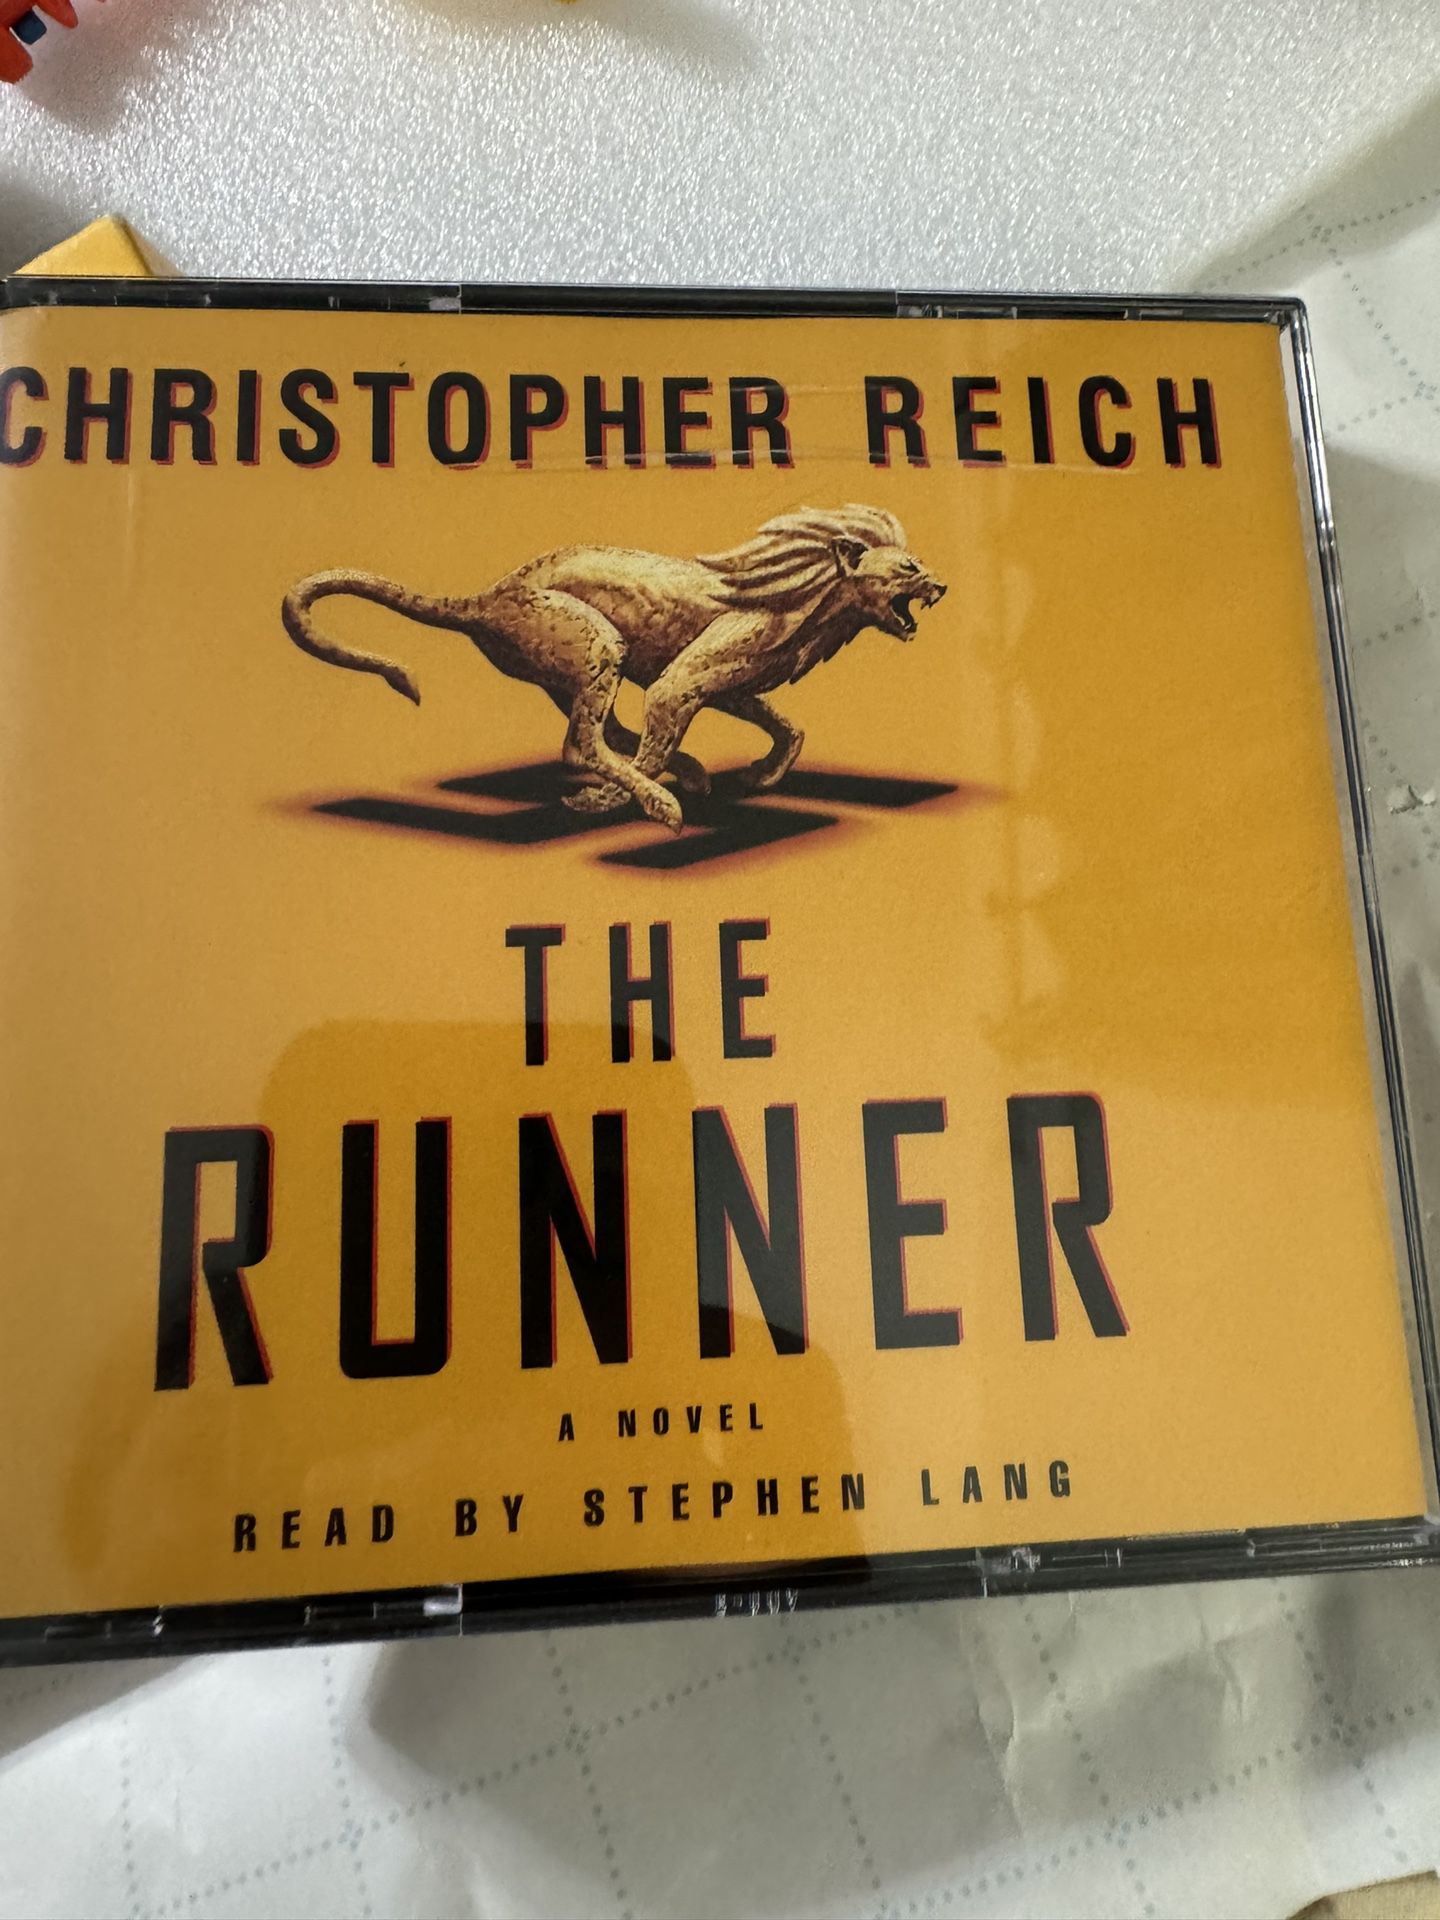 Christopher Reich The Runner A novel audiobook NEW Sealed 5 Disc set